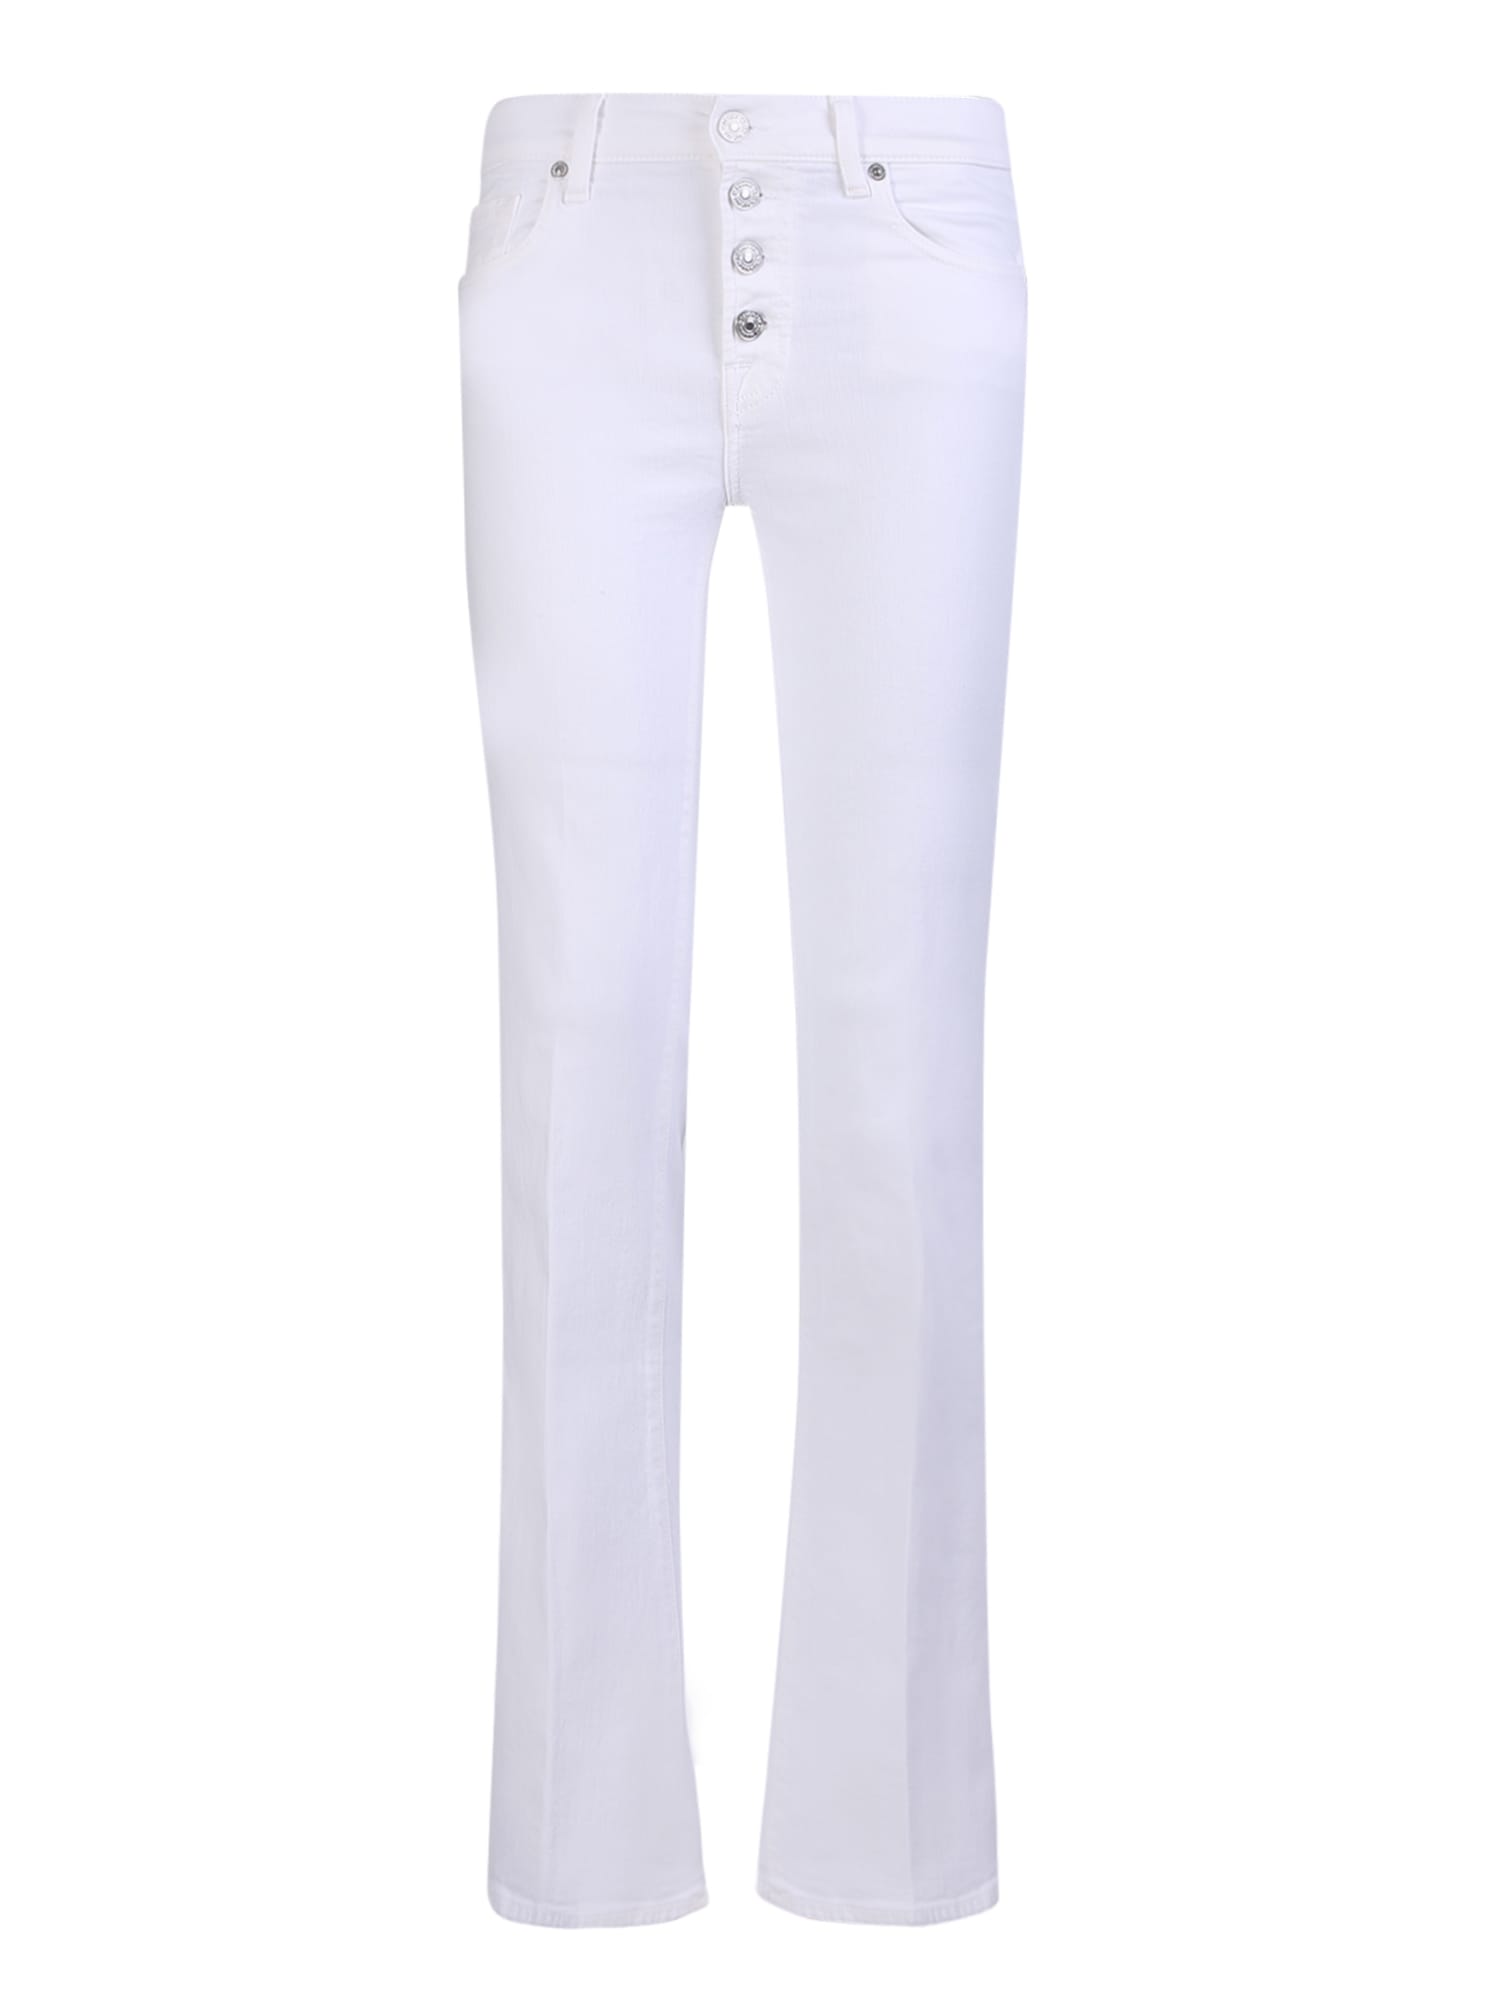 Shop 7 For All Mankind Bootcut White Jeans